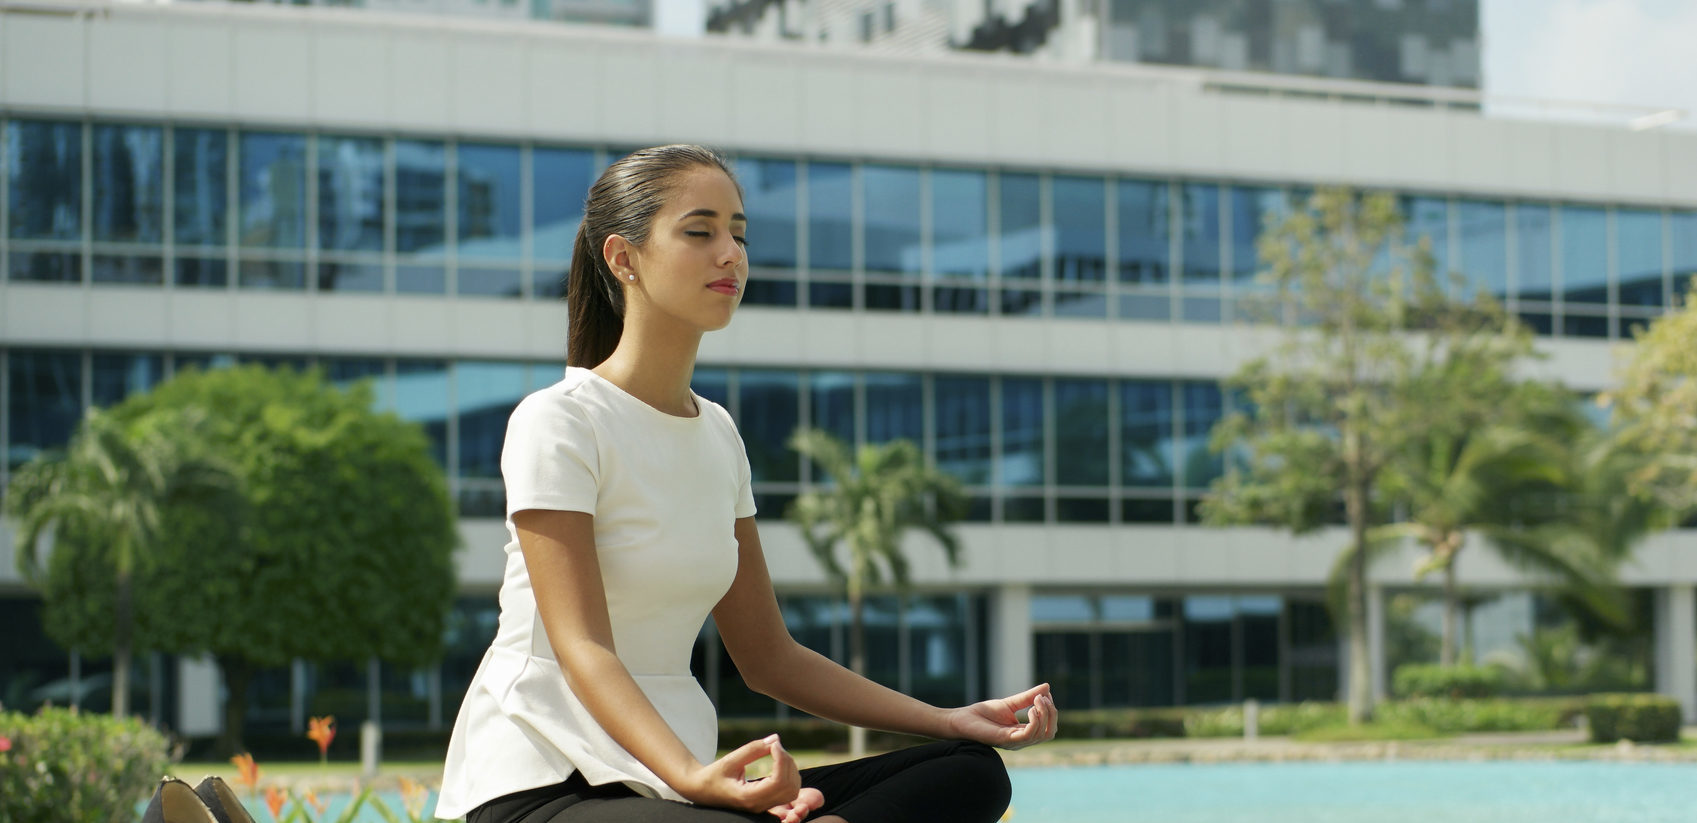 How do I find the best tips in meditation training? 1